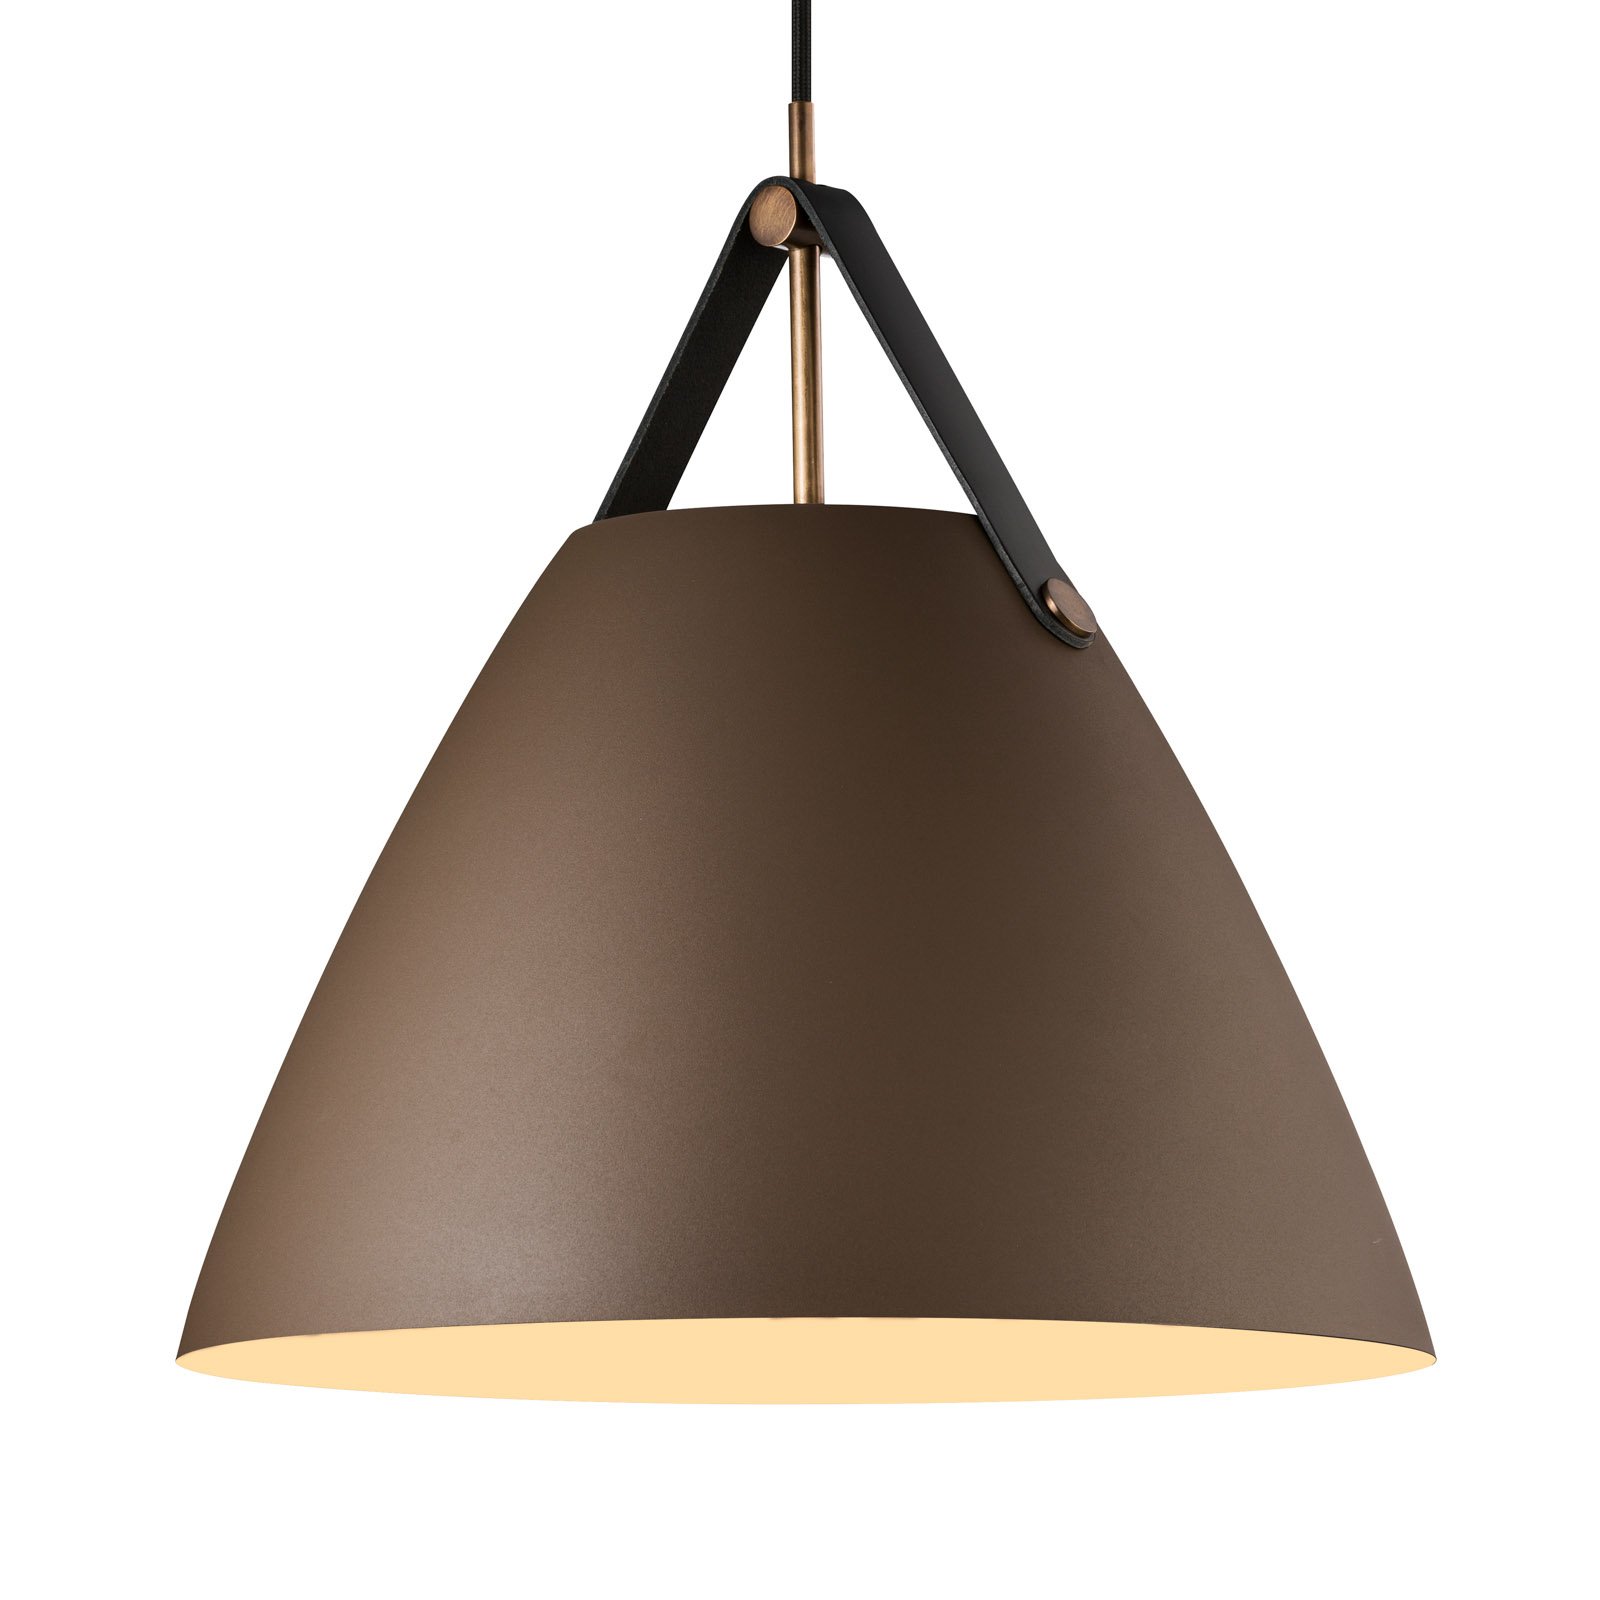 Hanging light Strap with metal shade beige, 36 cm